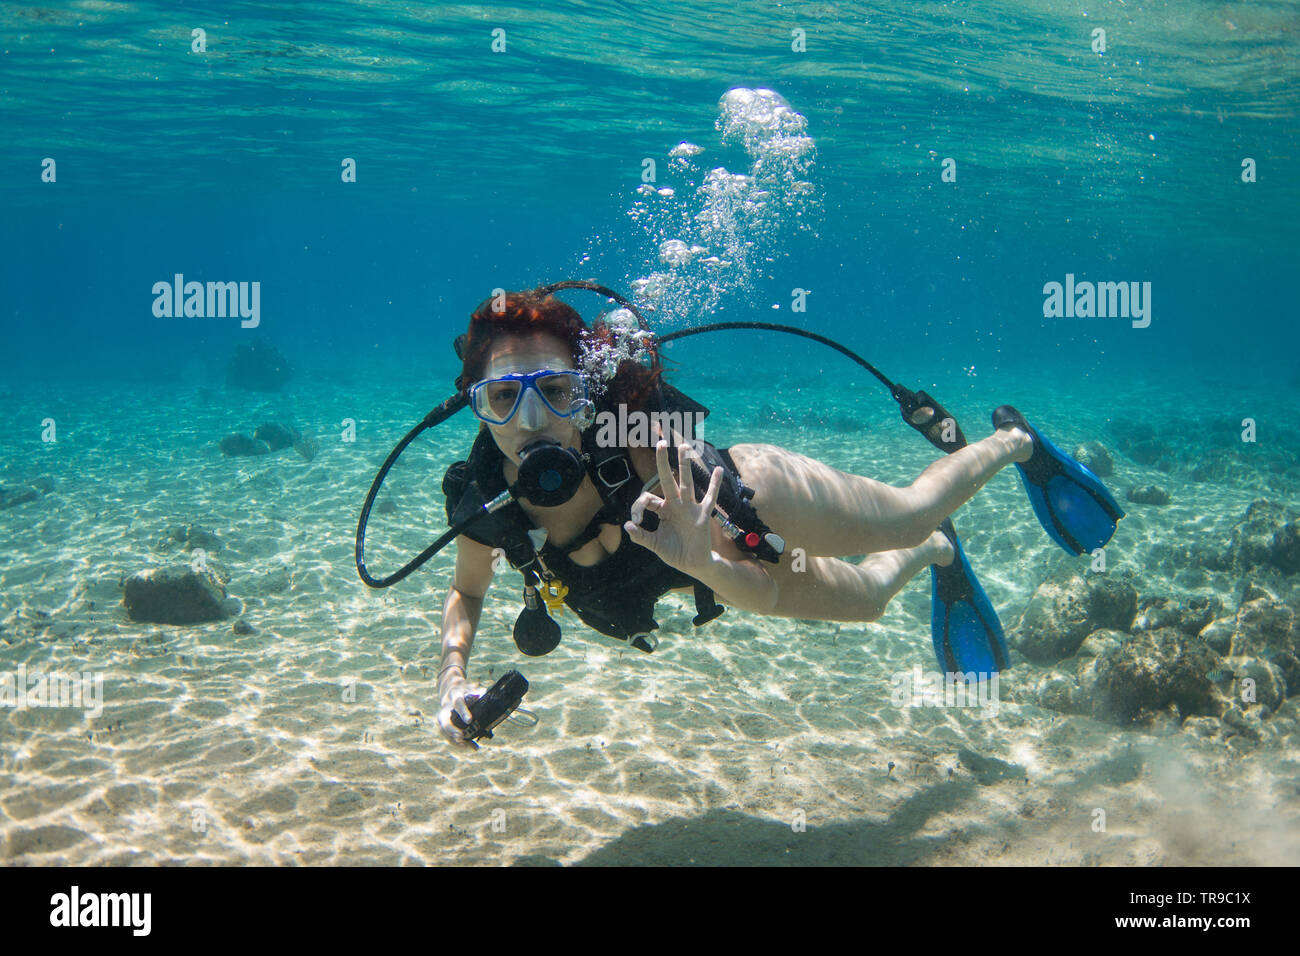 COZUMEL, MEXICO: woman scuba diver making ok signal underwater in a turquoise sea Stock Photo